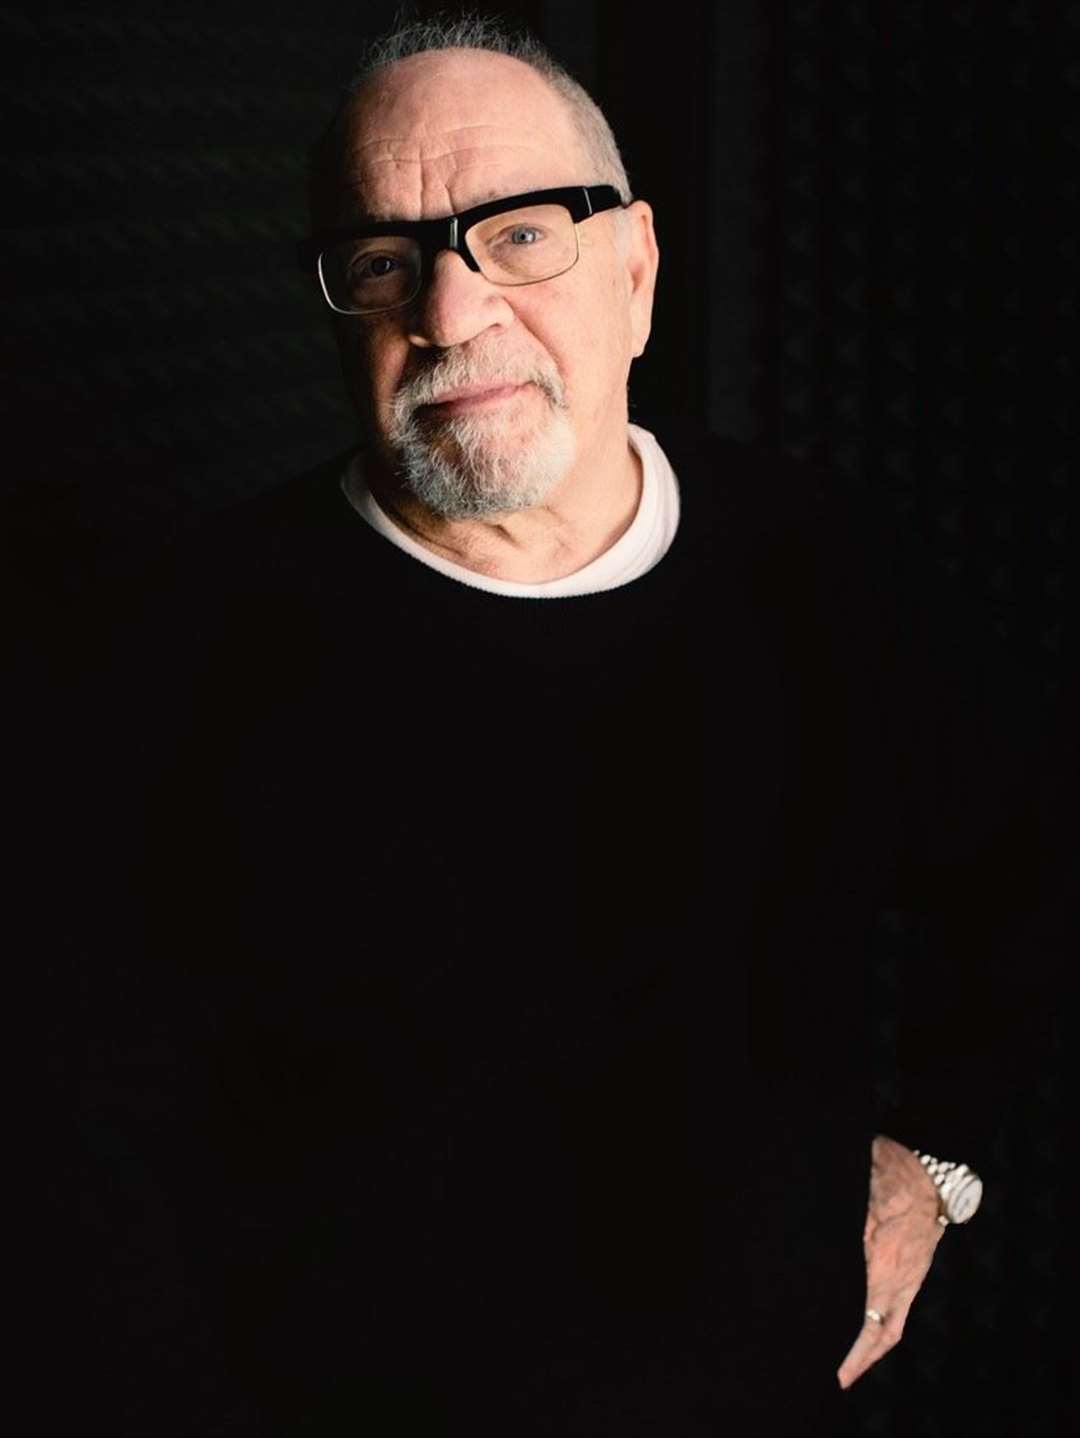 Screenwriter Paul Schrader will be discussing some of his legendary films